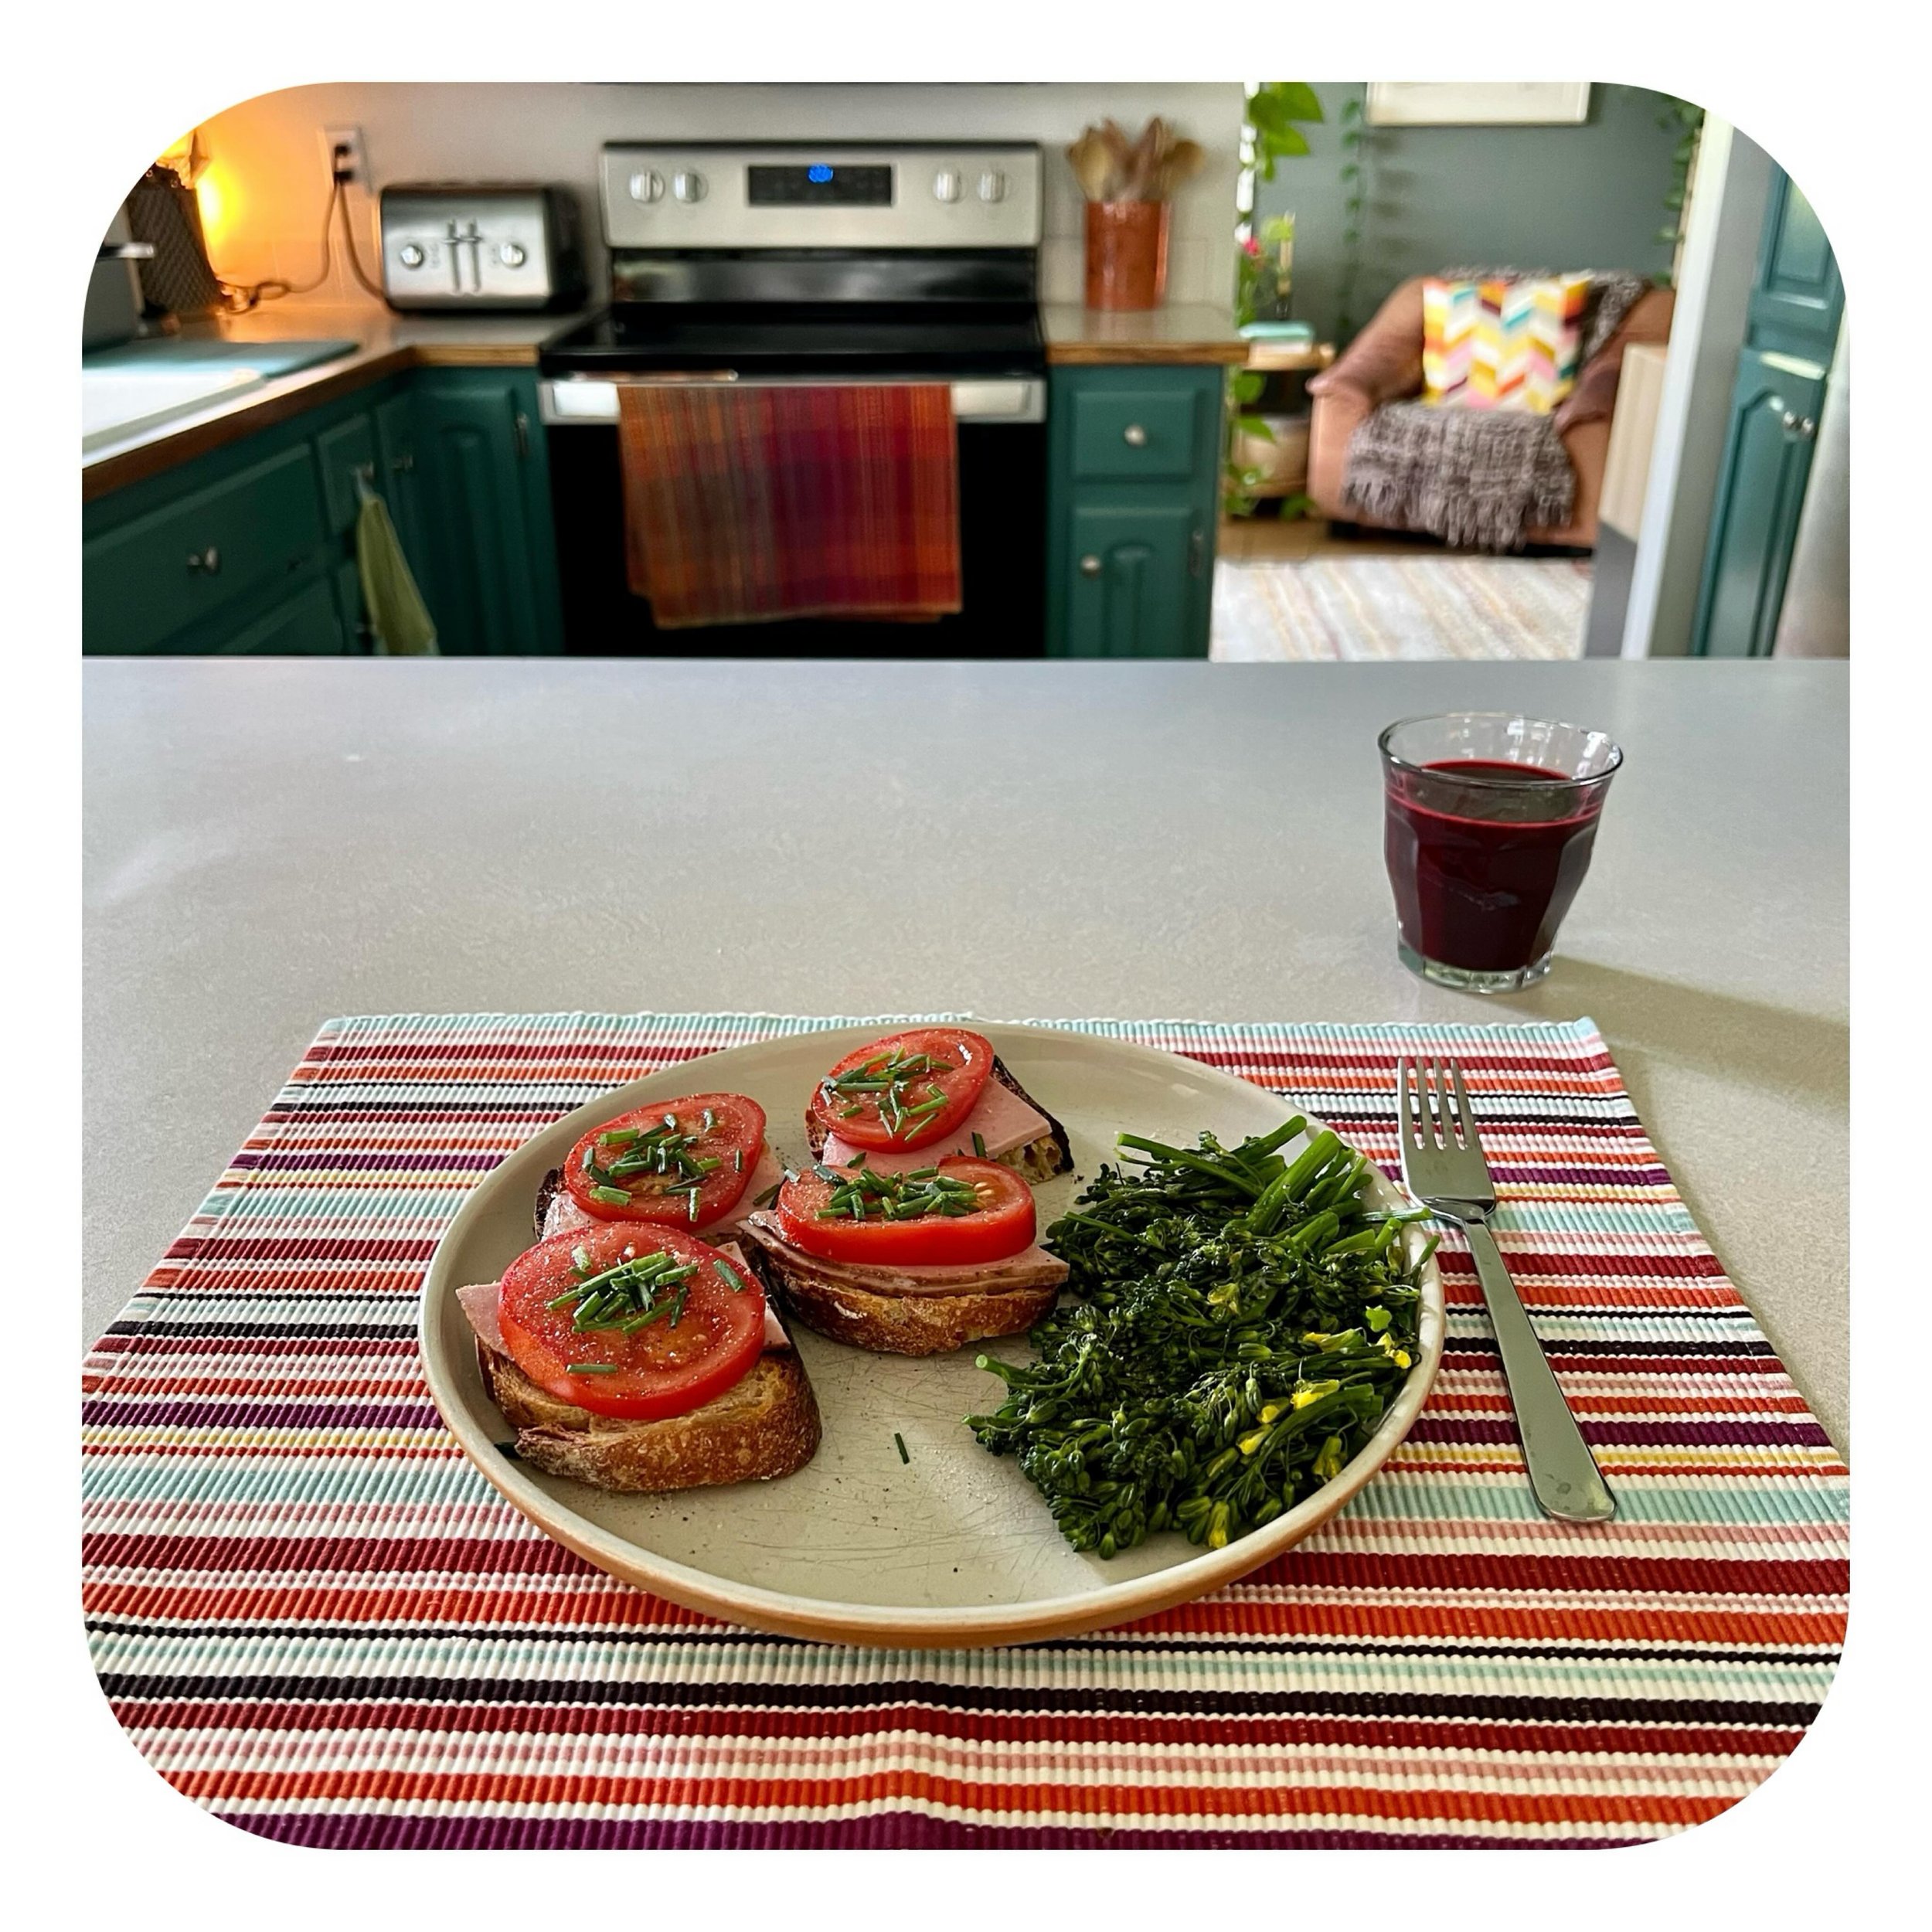 380 cals &bull; Lunch: sourdough bread with 2 slices Applegate Black Forest Ham, tomatoes, and a side of steamed broccolini

As you have probably noticed, I love colorful food. It gives my ADHD brain a nice dopamine hit and usually involves healthy v